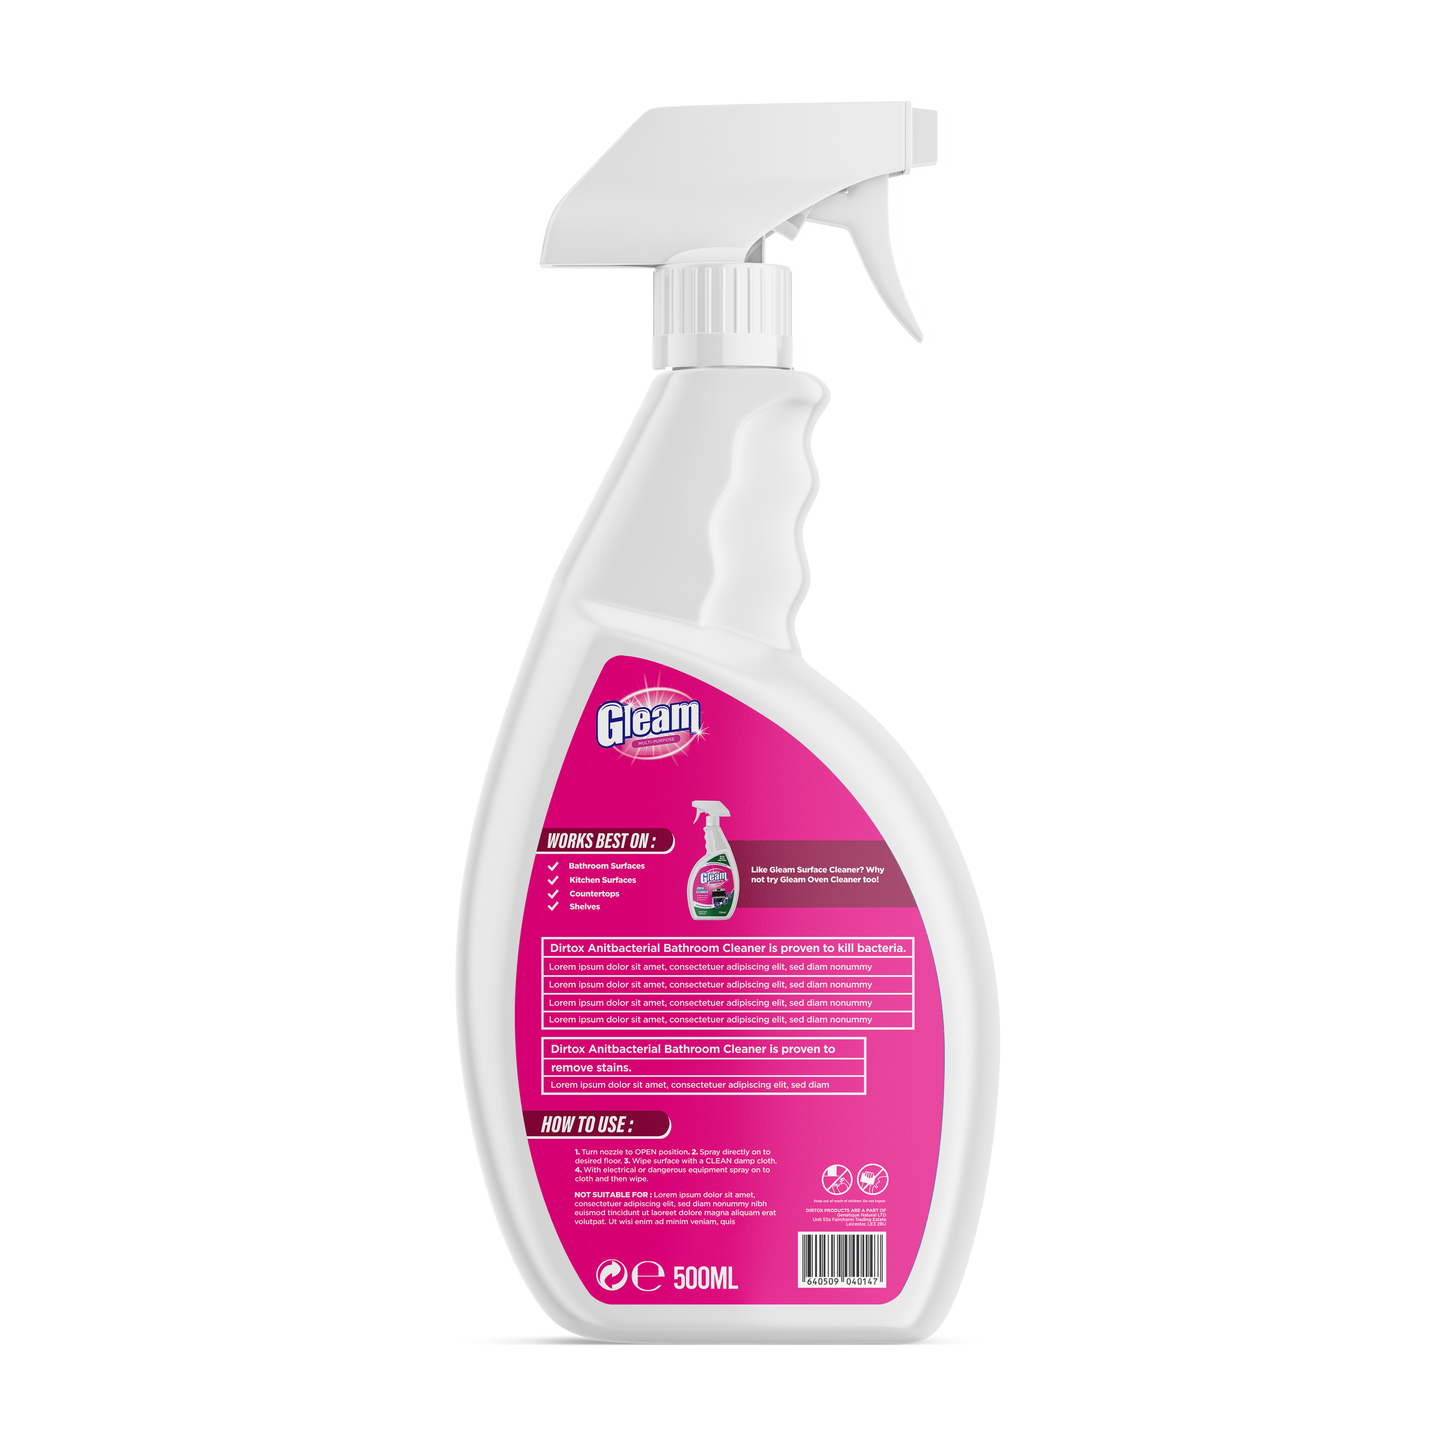 Gleam Surface Cleaner